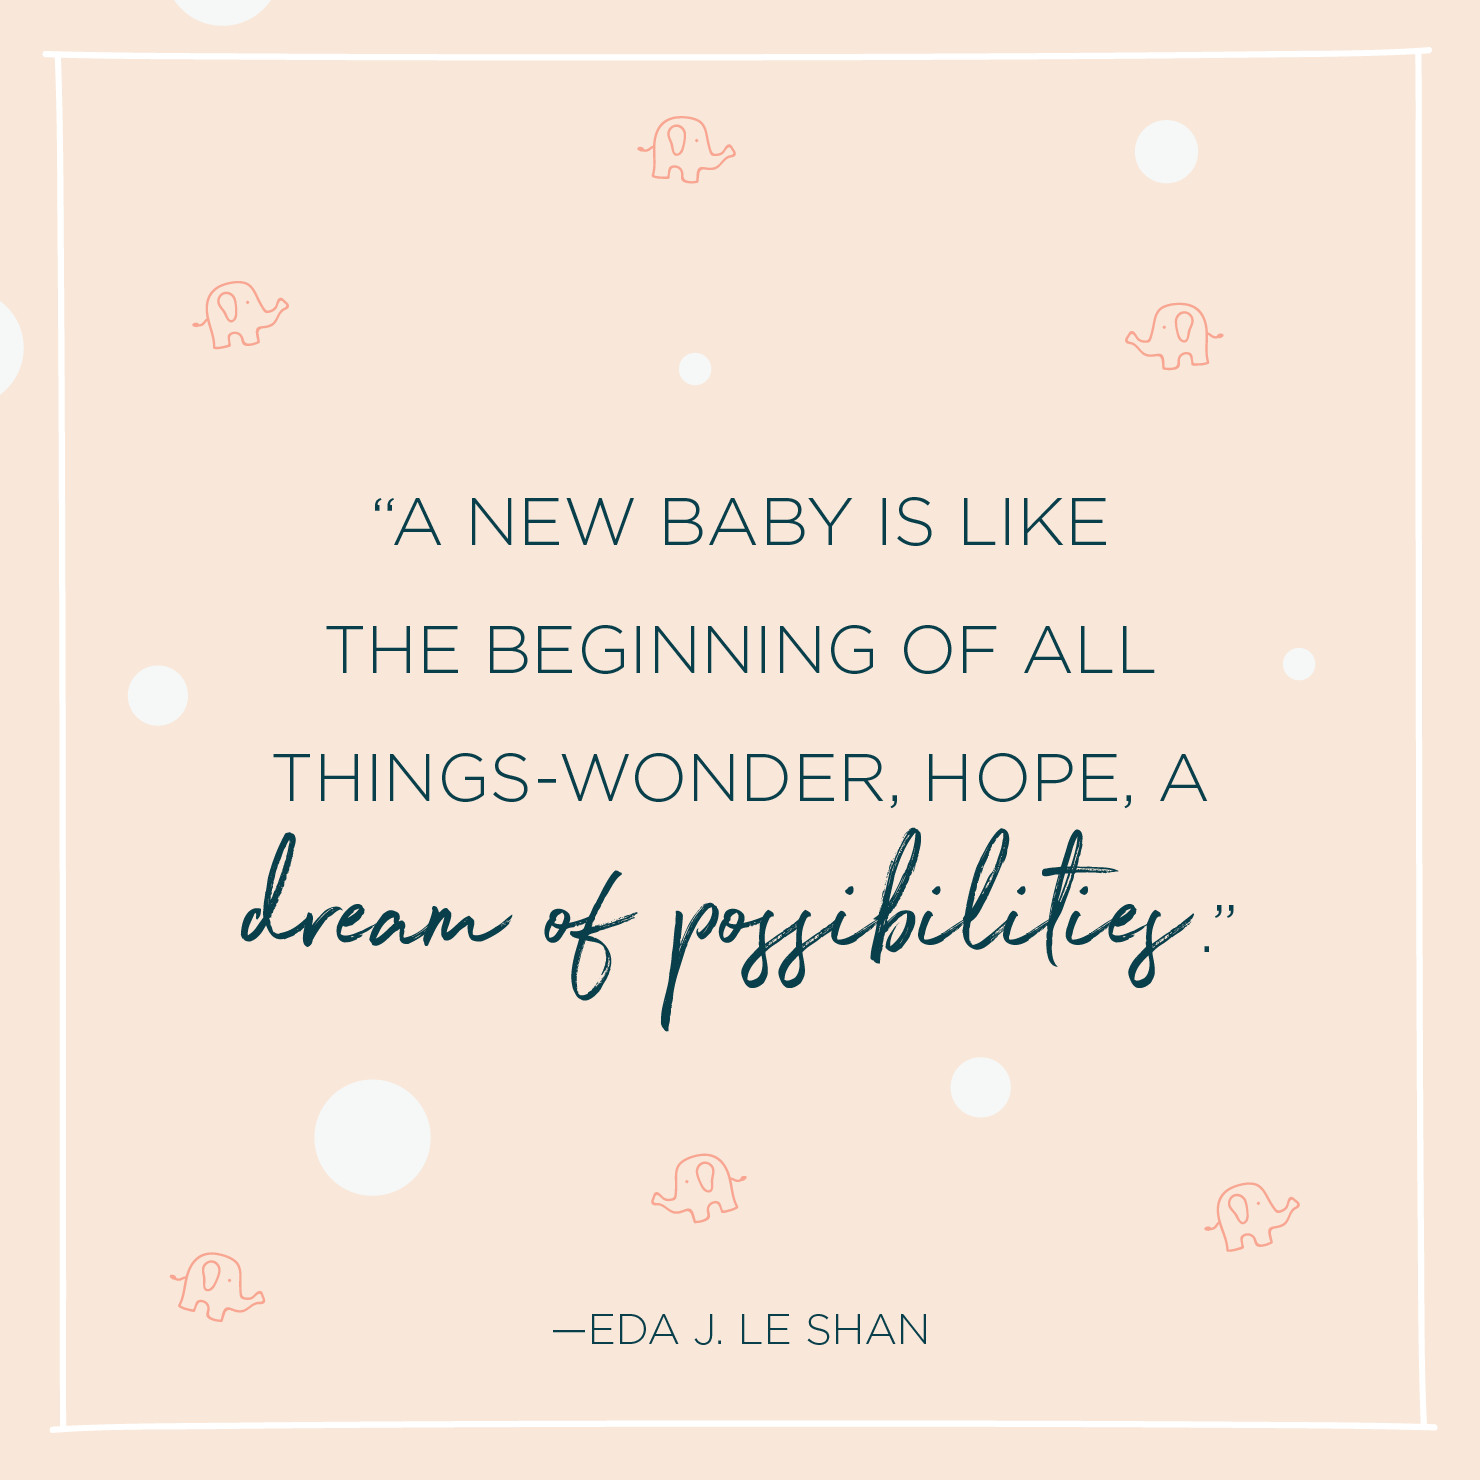 Newborn Inspirational Quotes
 84 Inspirational Baby Quotes and Sayings